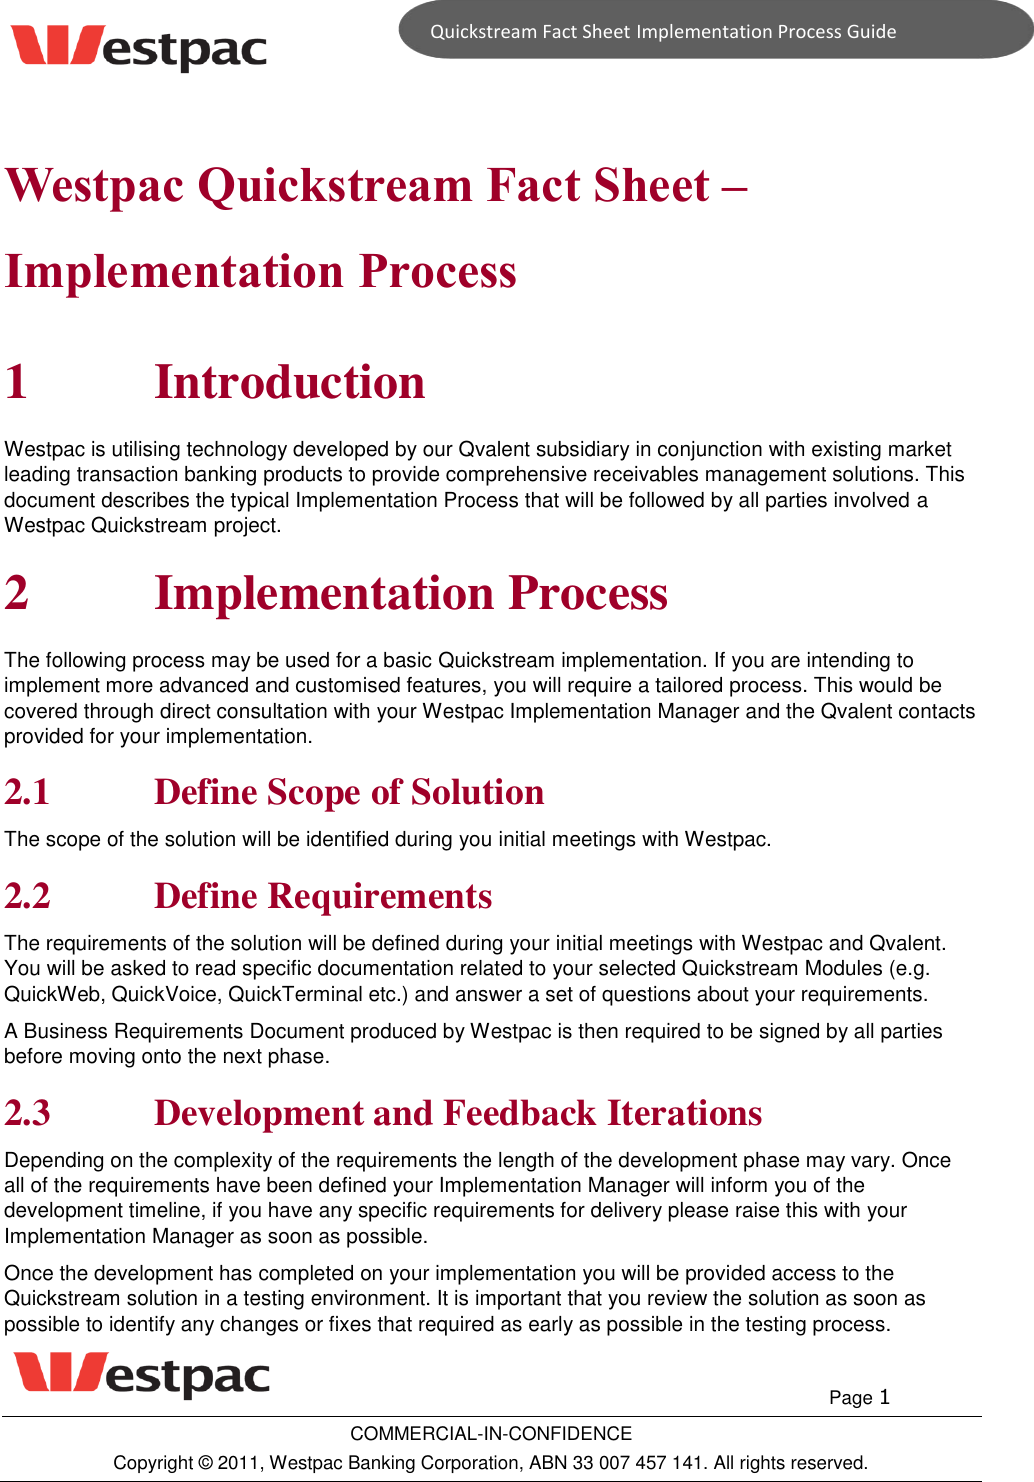 Page 1 of 3 - Quickstream Fact Sheet - Implementation Process Guide